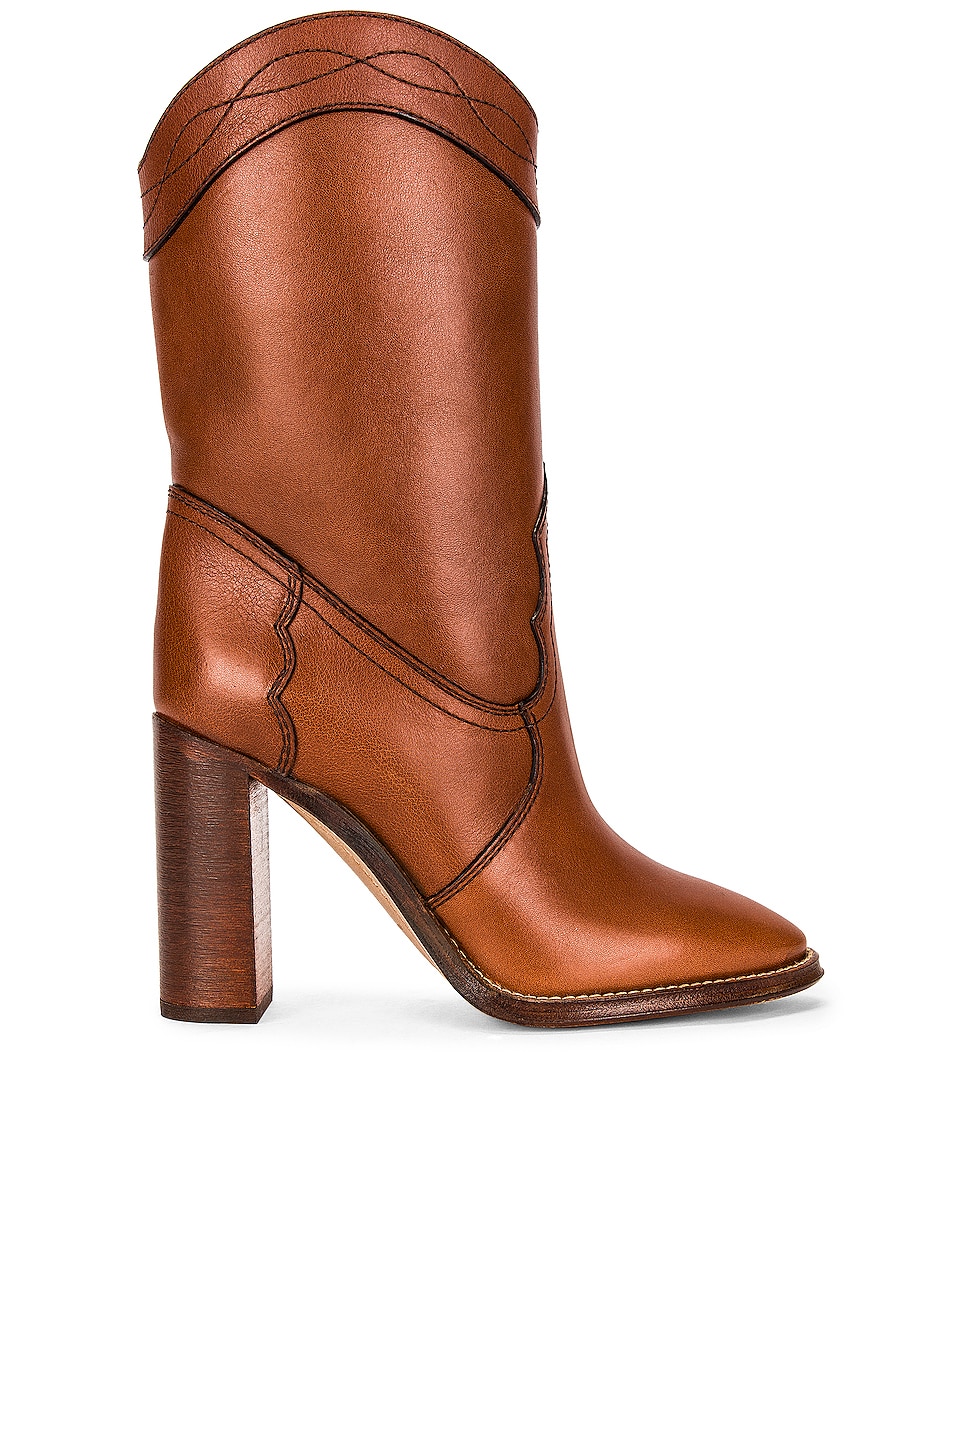 10 High-Heel Cowboy Boots for an Elevated Fall #OOTD